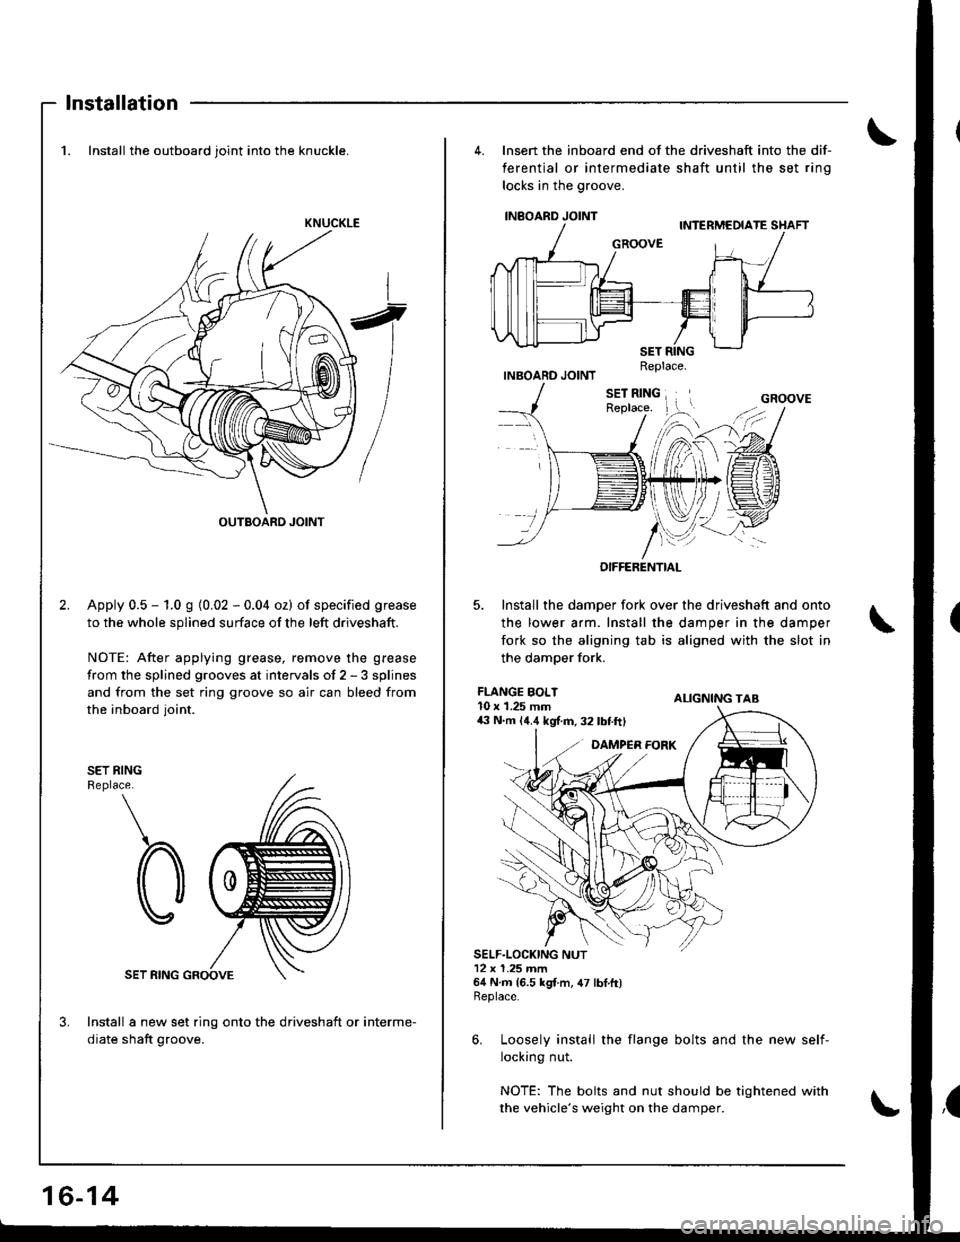 HONDA INTEGRA 1998 4.G Workshop Manual Installation
1. Install the outboard joint into the knuckle.
Apply 0.5 - 1.0 g {0.02 - 0.04 oz) of specified grease
to the whole splined surface of the left driveshaft.
NOTE: After applying grease, re